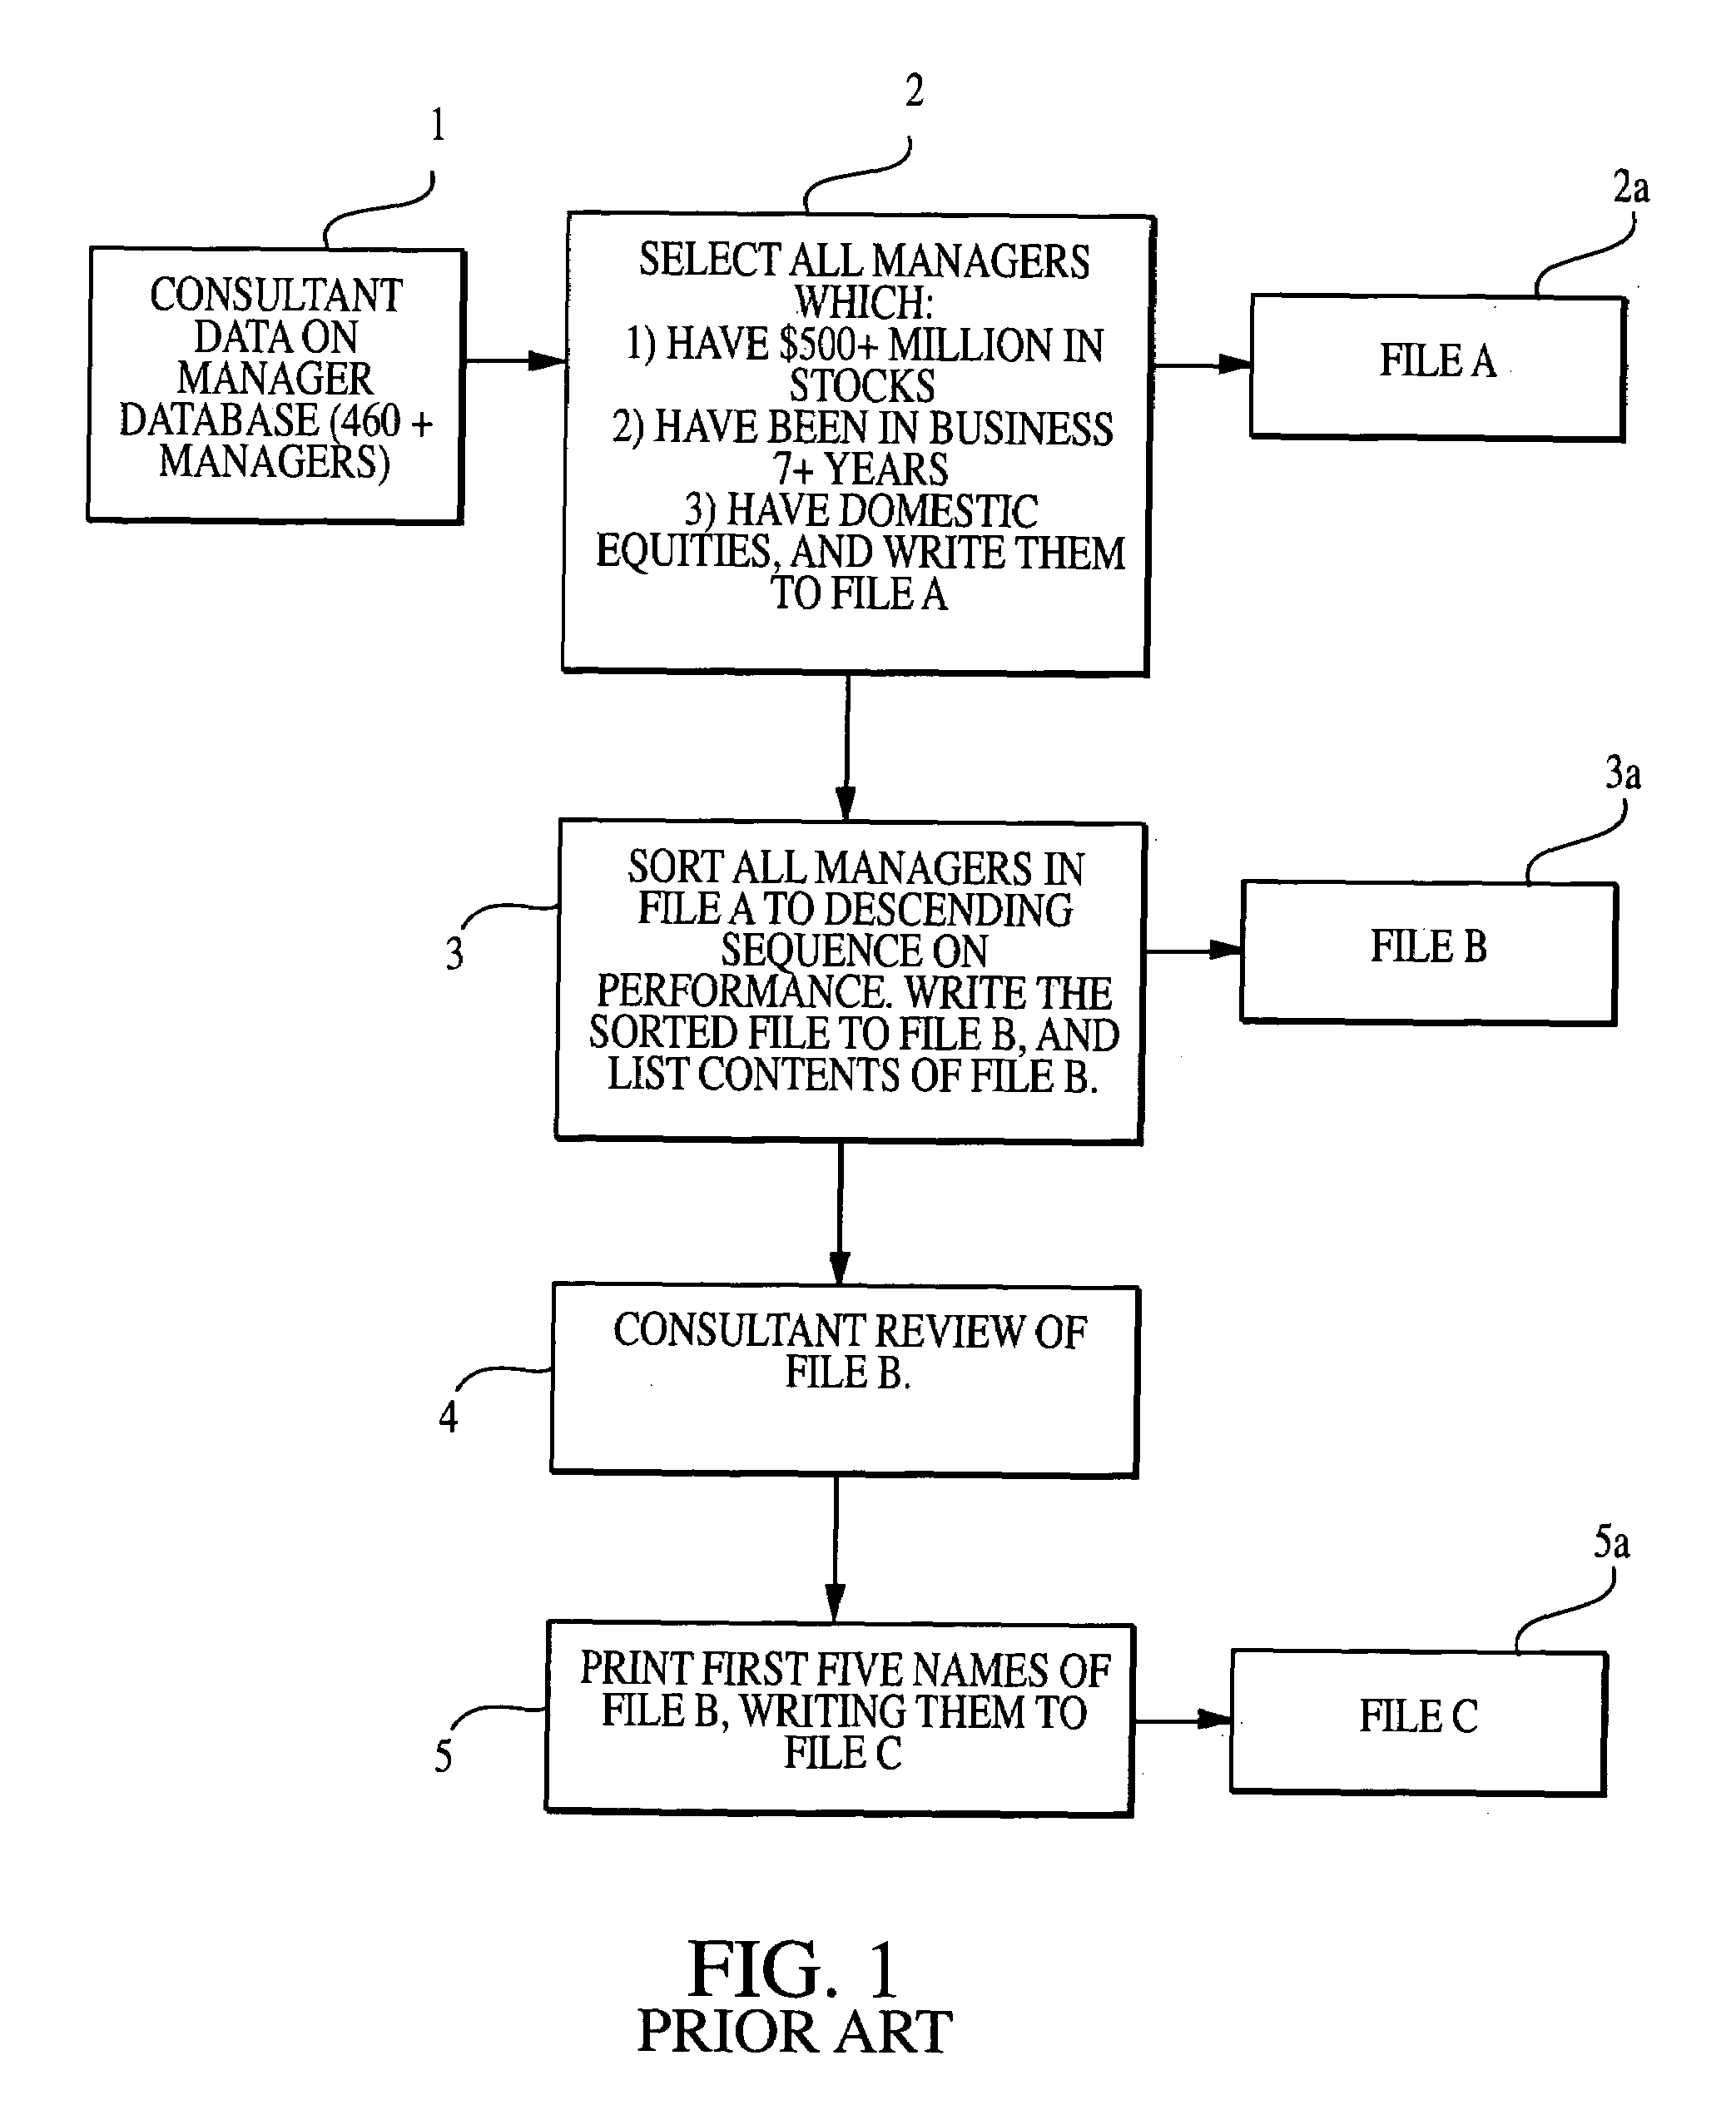 System, method and computer readable medium containing instructions for evaluating and disseminating investor performance information